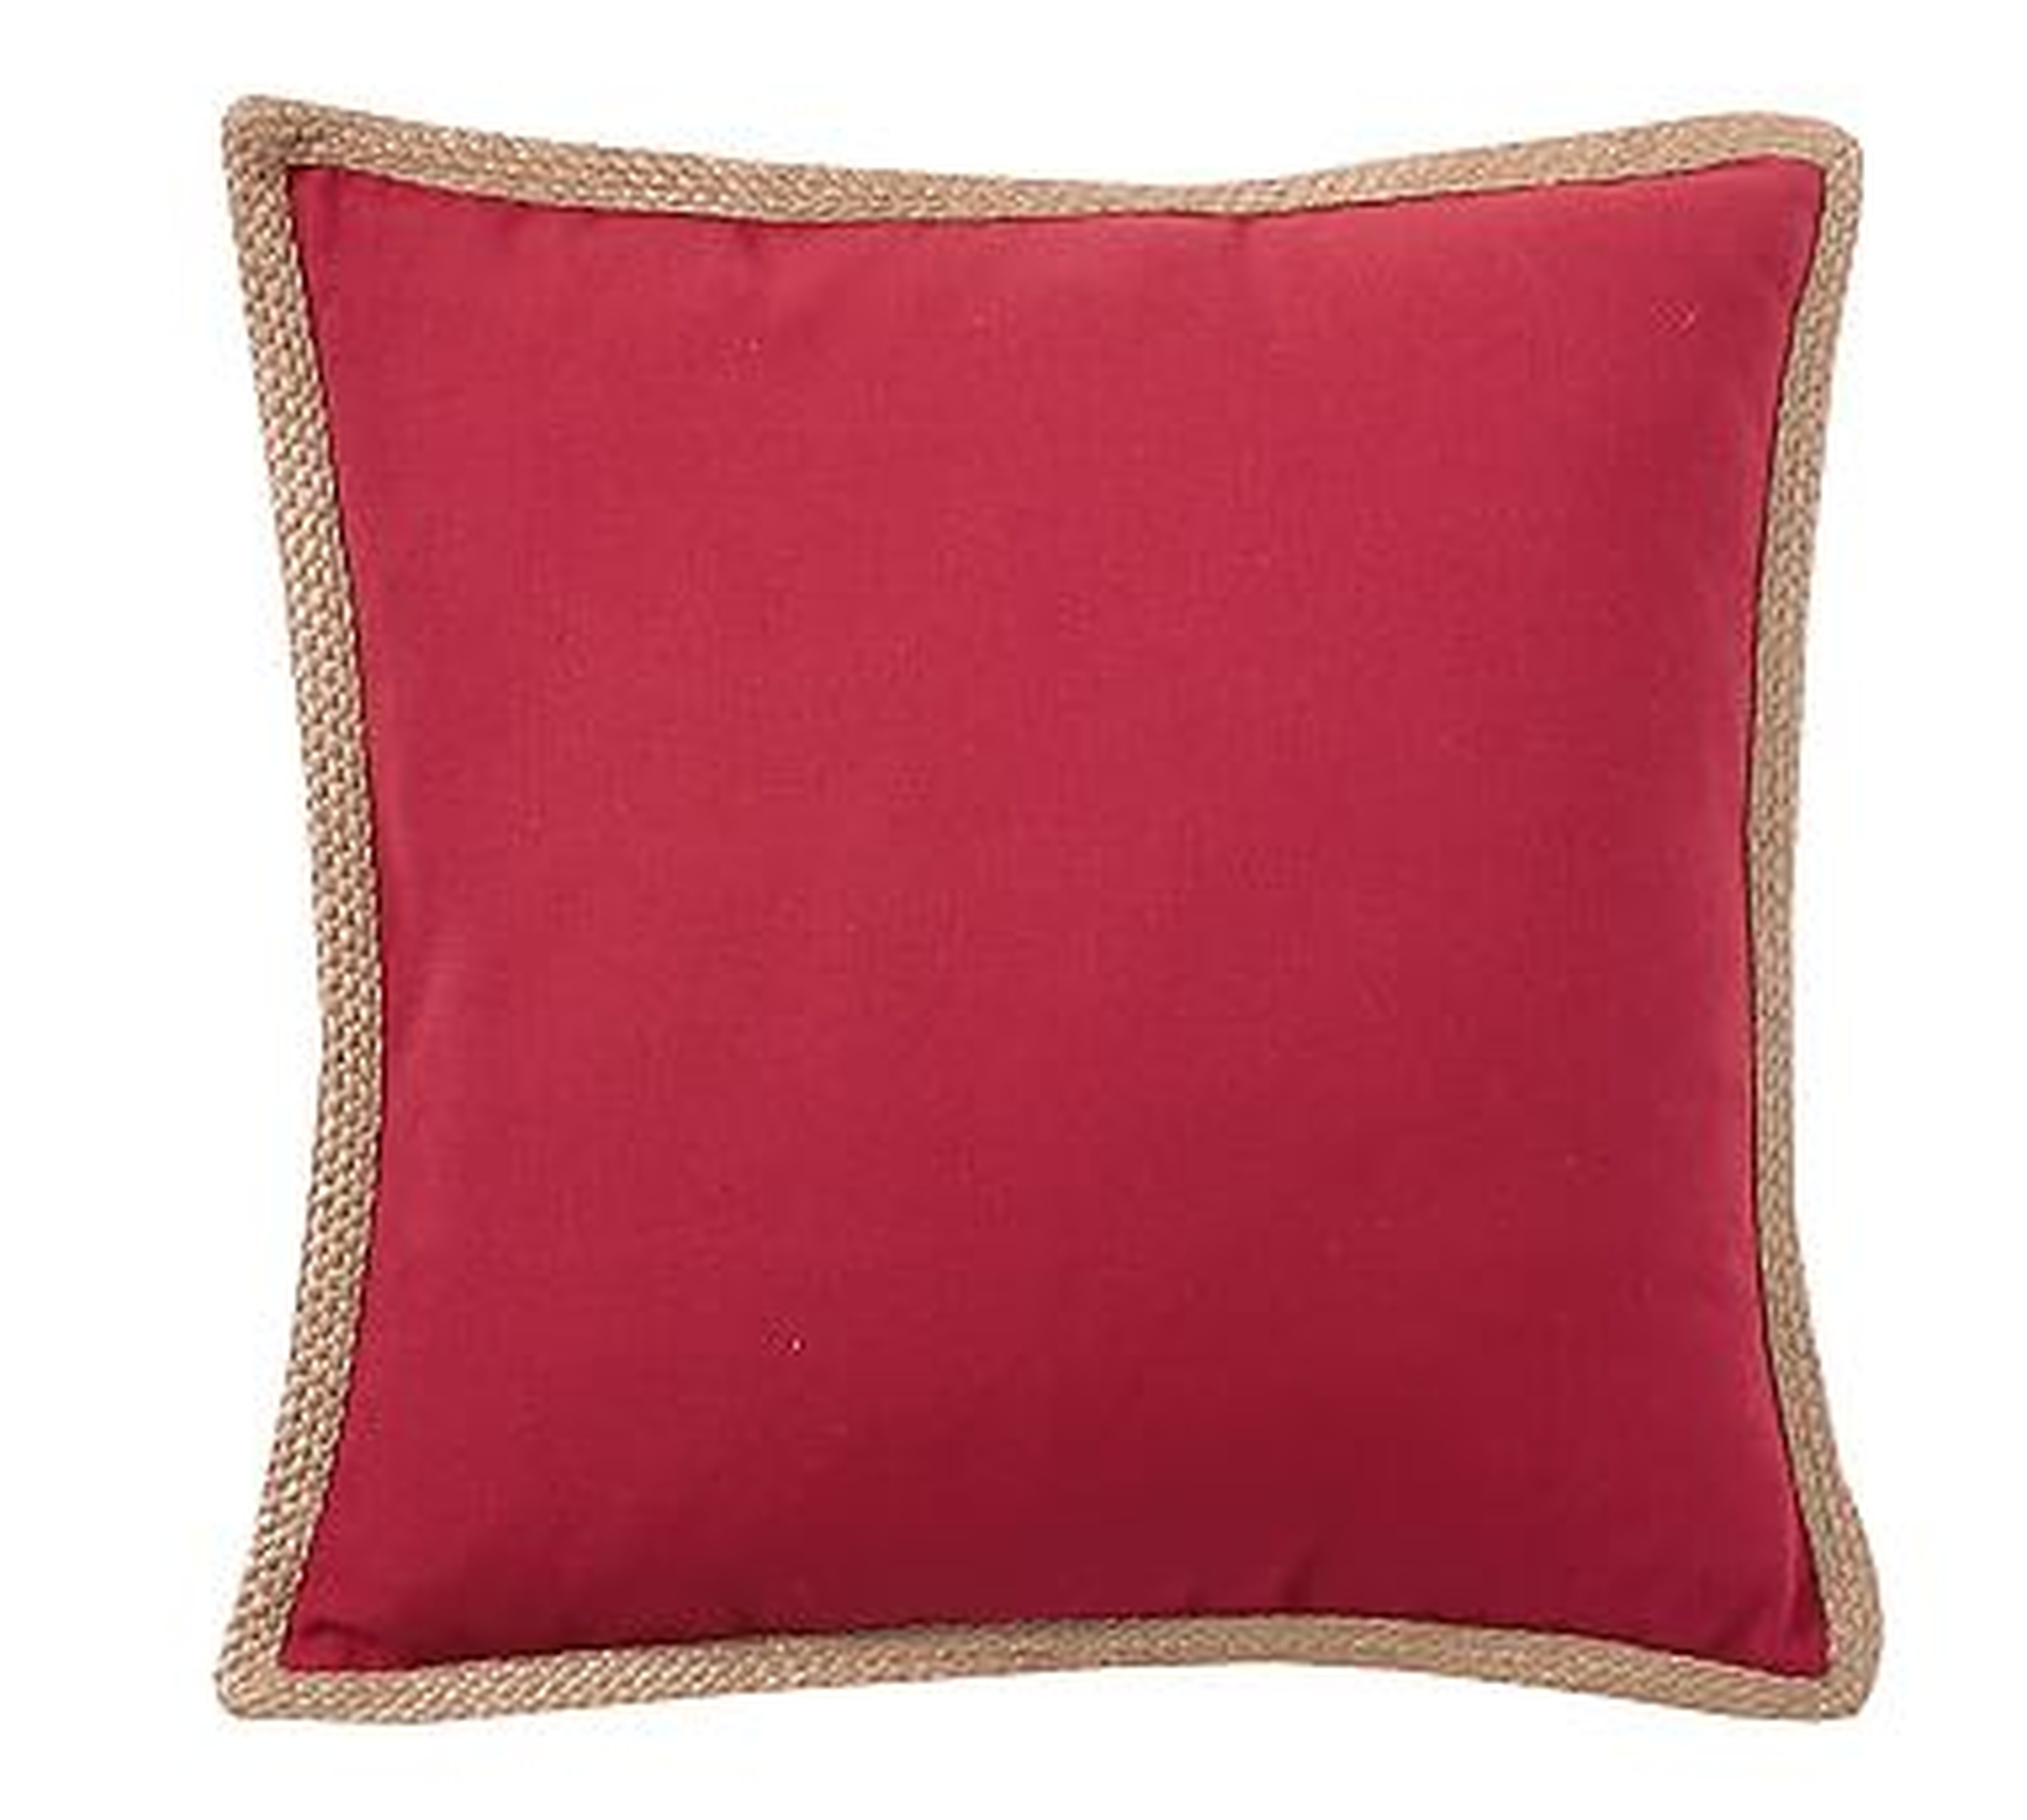 Synthetic Trim Indoor/Outdoor Pillow, 20", Cherry Red - Pottery Barn